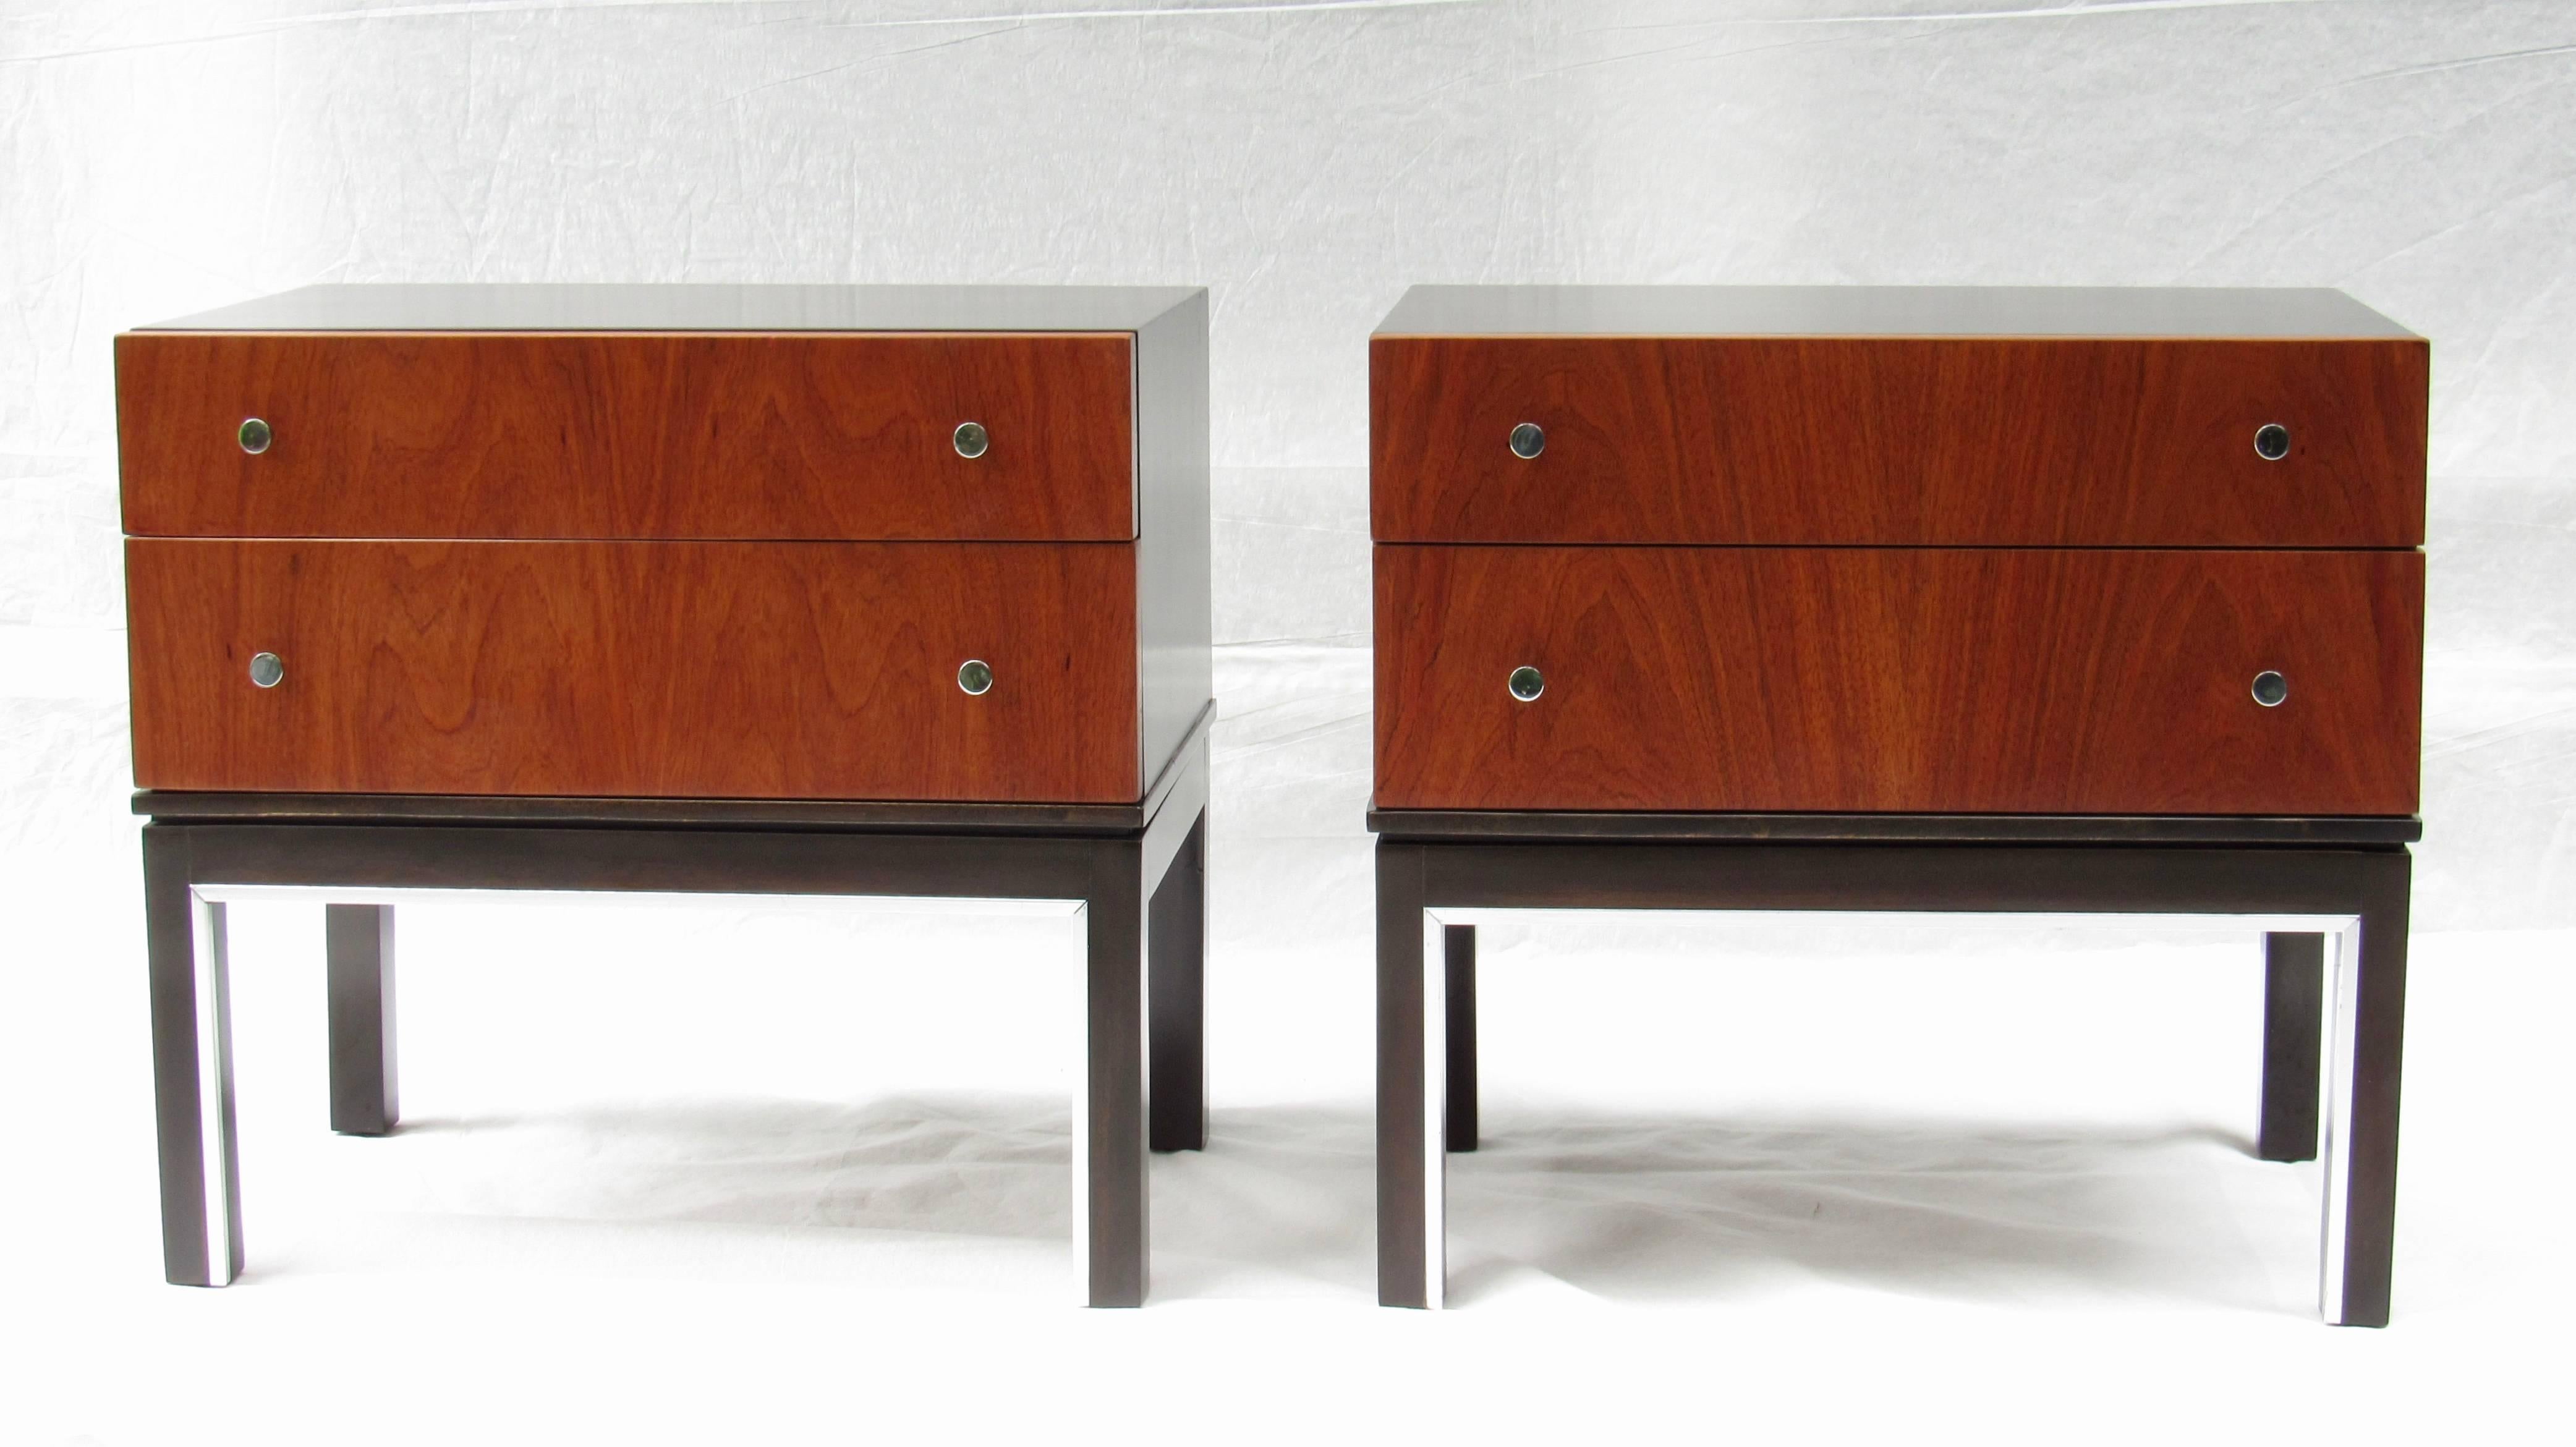 A striking pair of walnut end tables / nightstands designed by Merton Gershun for American of Martinsville in the early 1960s.
The bases have inset chrome accents.
Both pieces are stamped American of Martinsville inside the upper drawer.
The pair